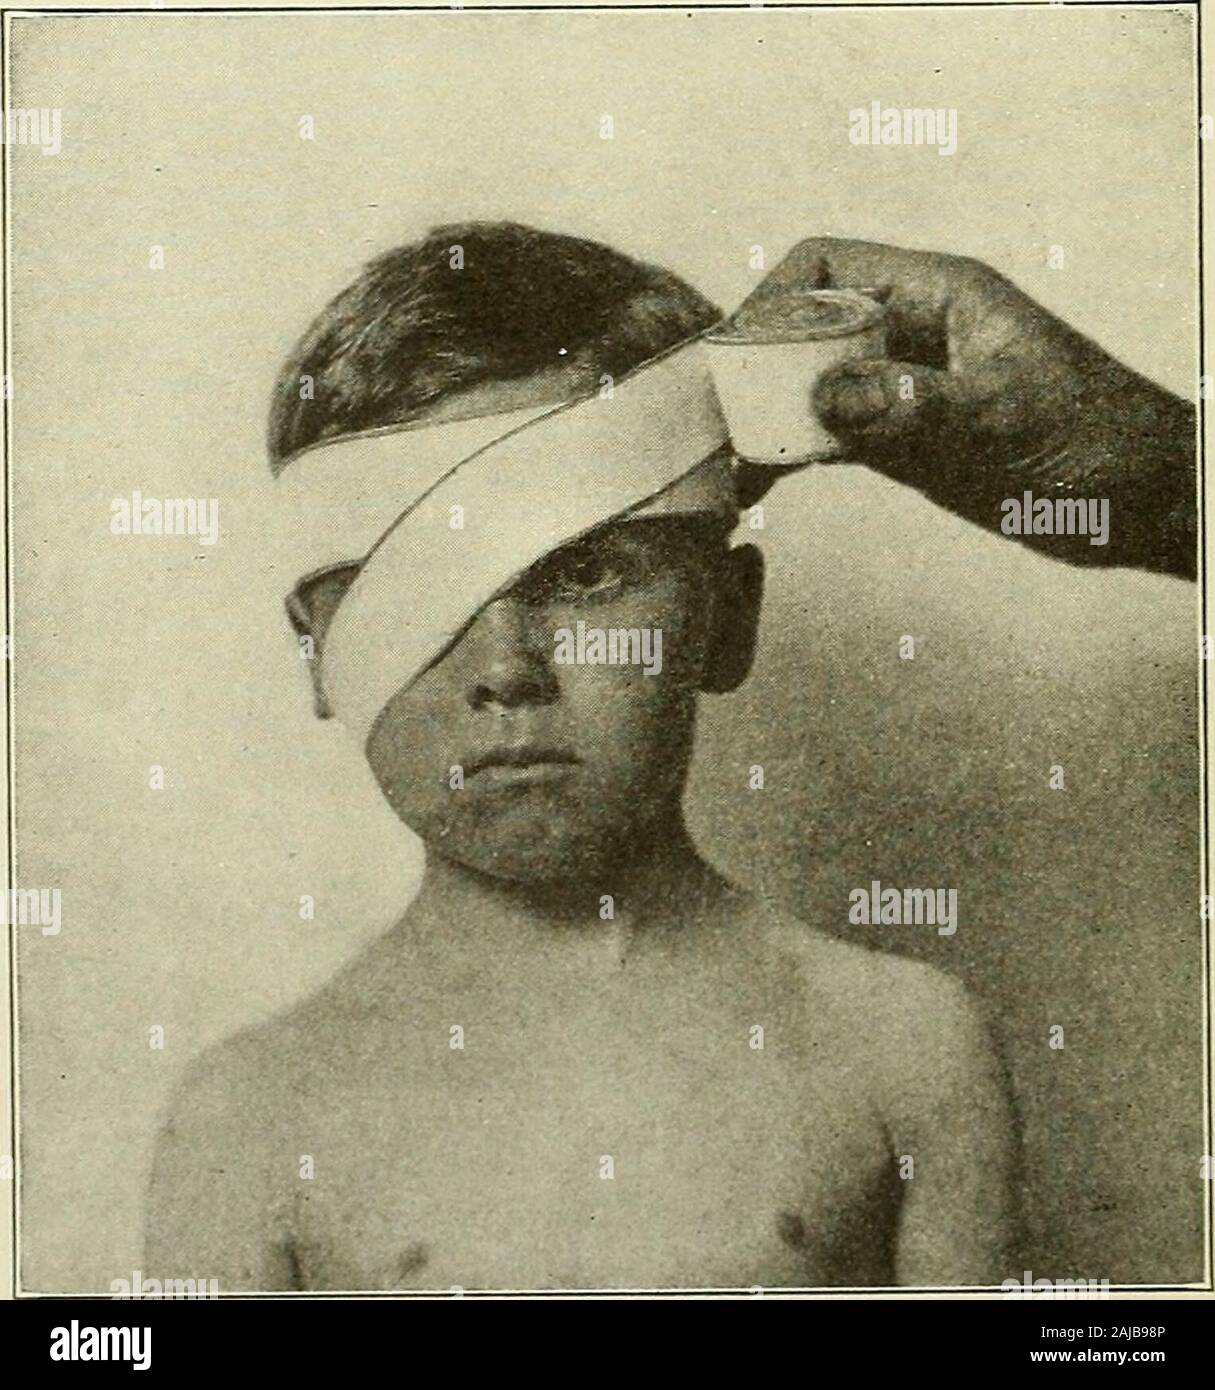 Preparatory and after treatment in operative cases . Fig. 247.—Dressing for Wounds of FaceAbove Nostrils. (Gerster.) dage should be made of oneand a half inch material.Gauze is used for the pur-pose because it is more pli-able than linen and will con-form more readily to theirregular outline of the parts.Wounds of the face healrapidly, the outcome of thevascularity of the part, and,perhaps, also because of thepresence in large quantity ofglandular elements in thissituation, resembling, inthese regards, the scalp.The suture material best em-ployed in this portion of thebody is horsehair or fine Stock Photo